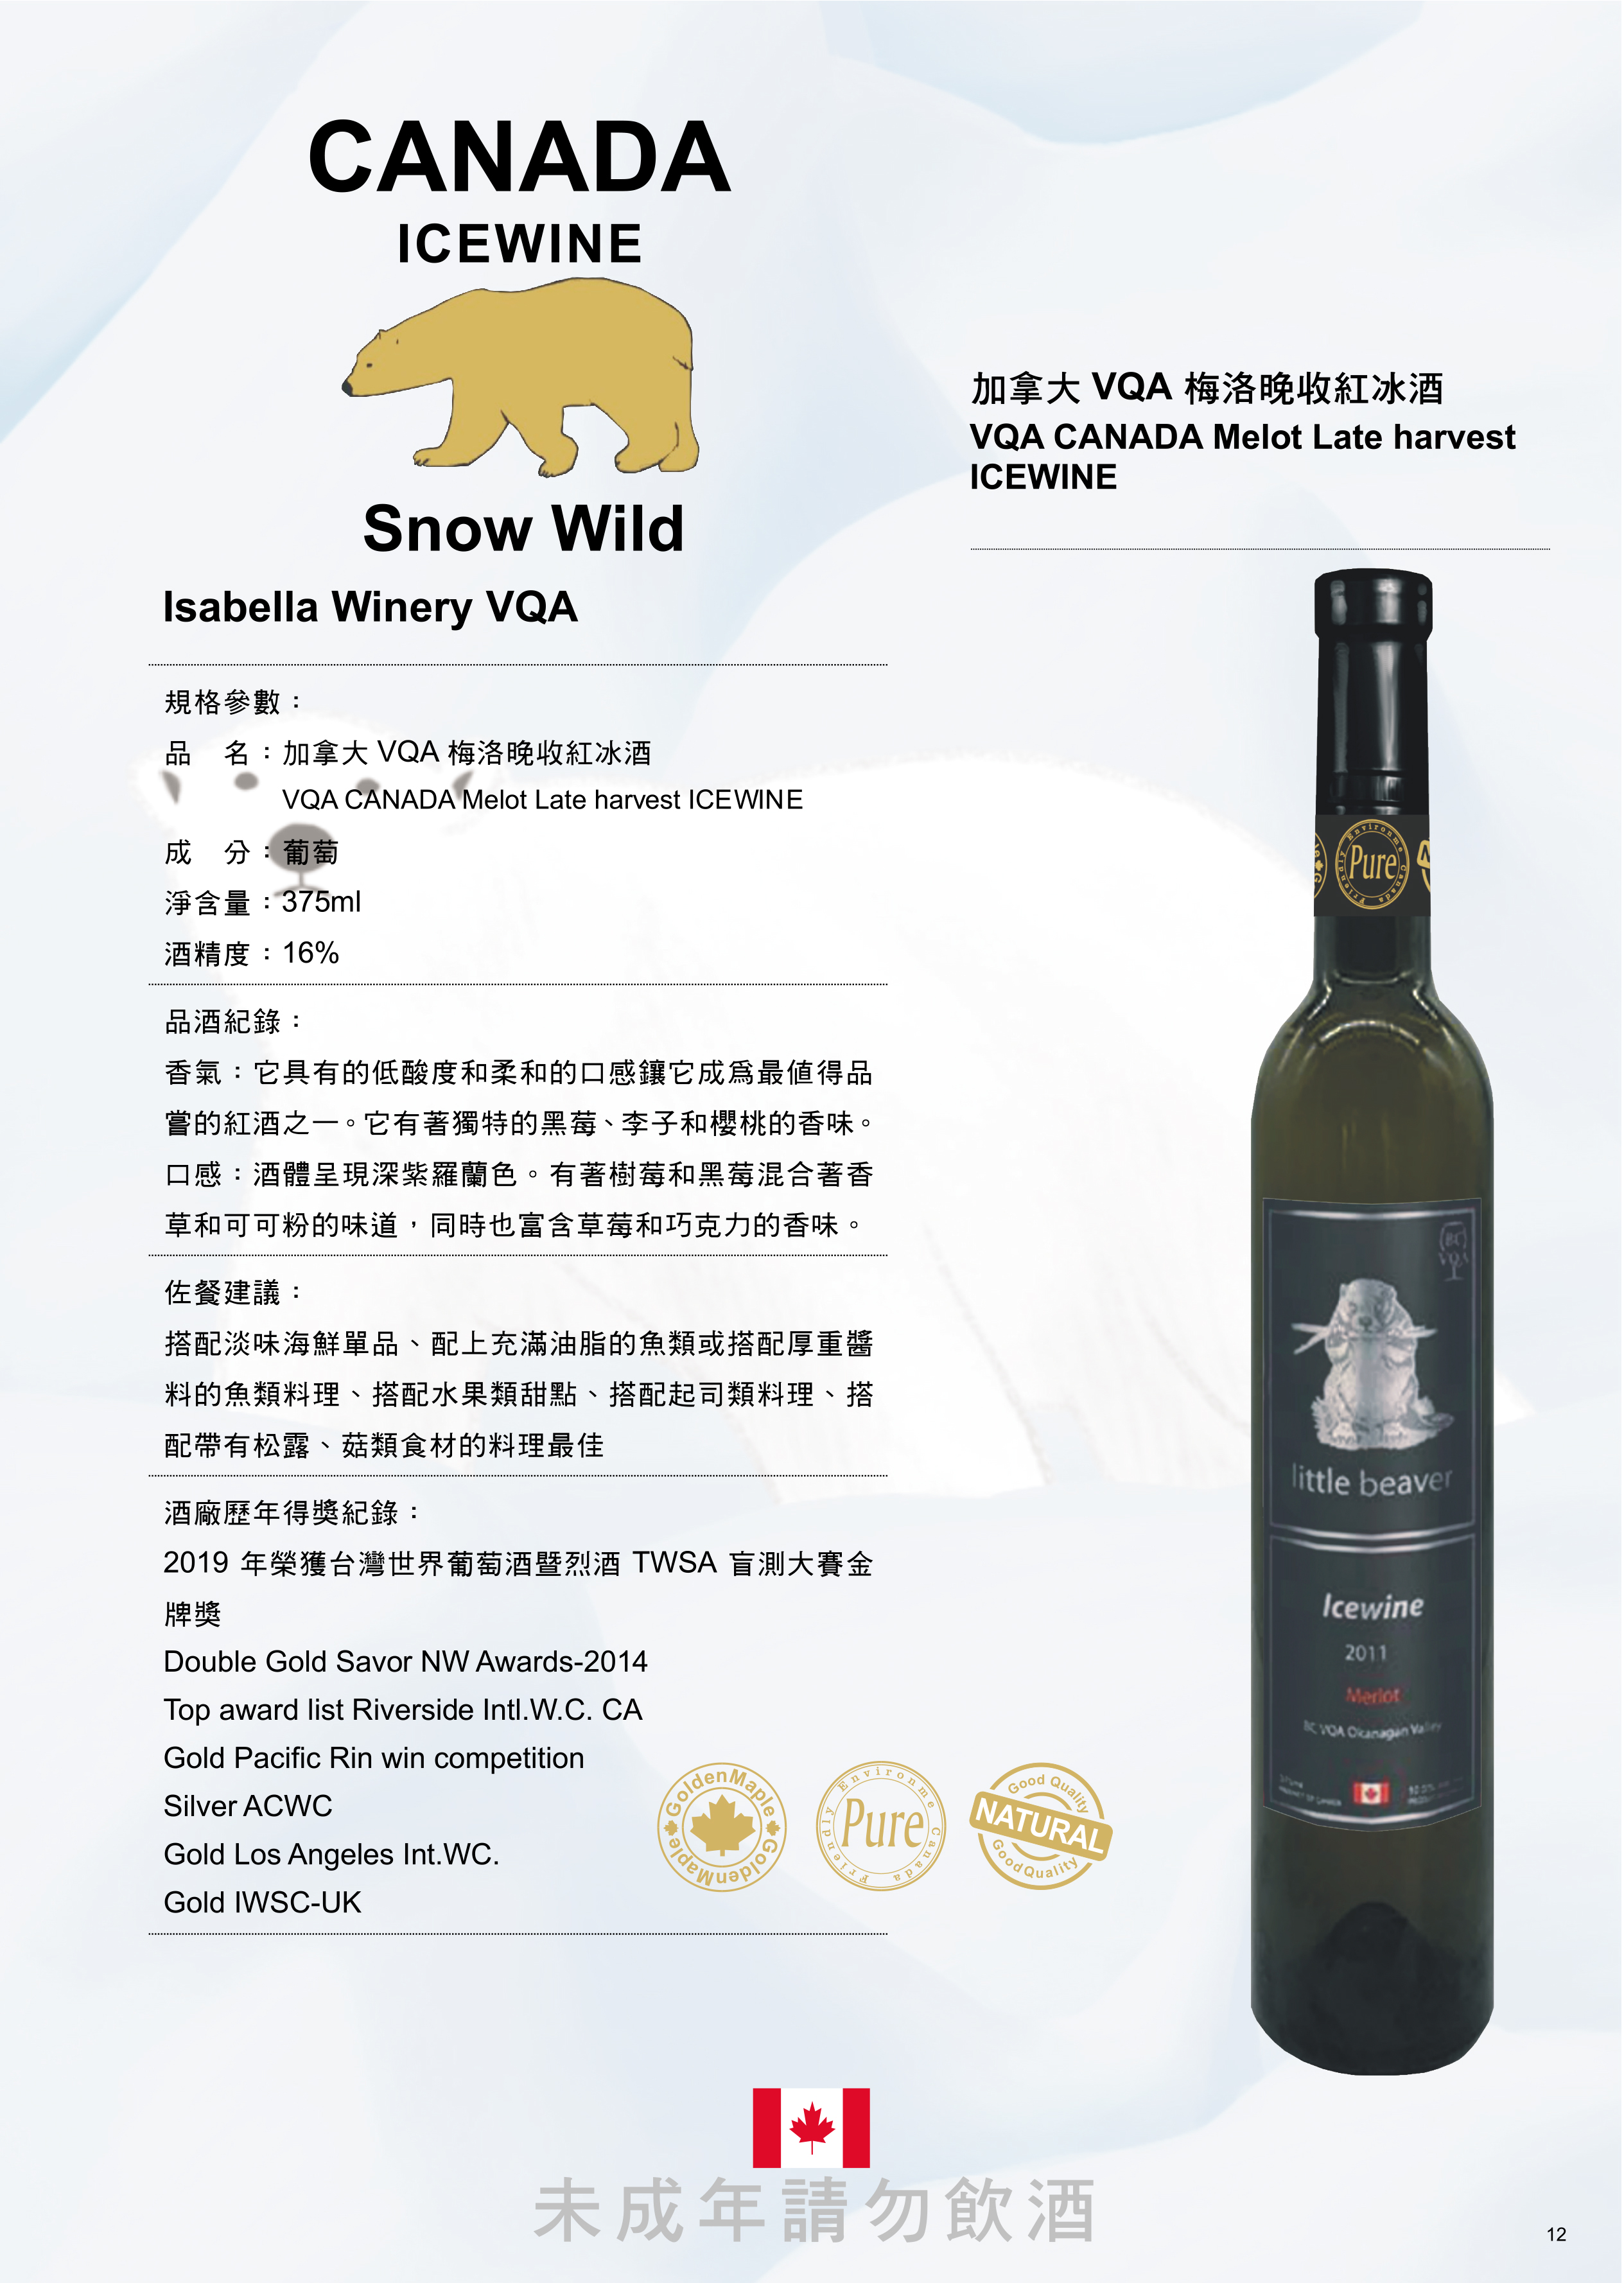 Giftionery Culture Creative Taipei Online Product Info Canada Snow Wild Enigma Territory Blueberry Fruit Wine Lu Teng Co Ltd